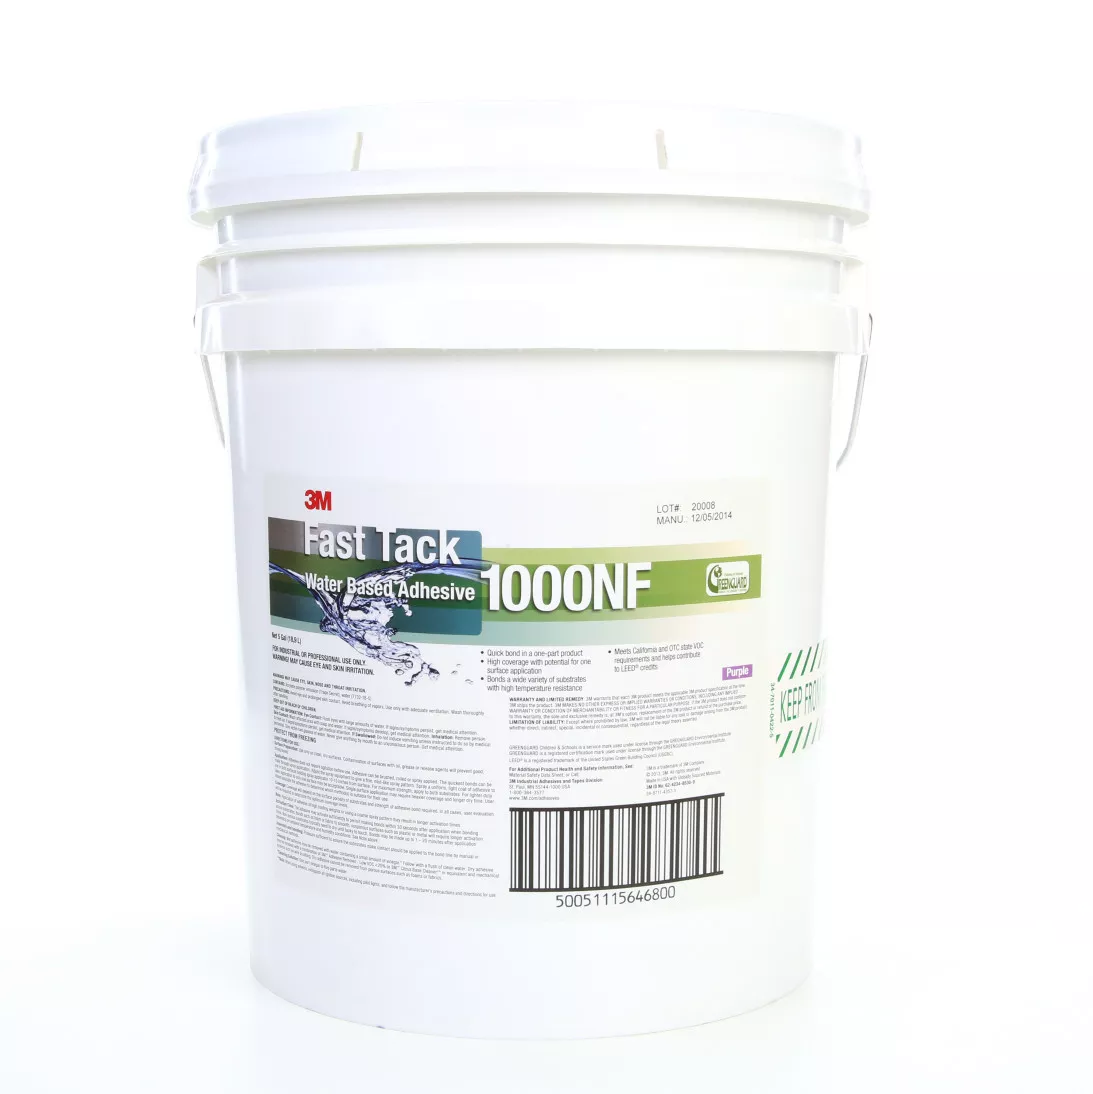 3M™ Fast Tack Water Based Adhesive 1000NF, Purple, Japanese Label, 5
Gallon Drum (Pail), 1 Can/Case